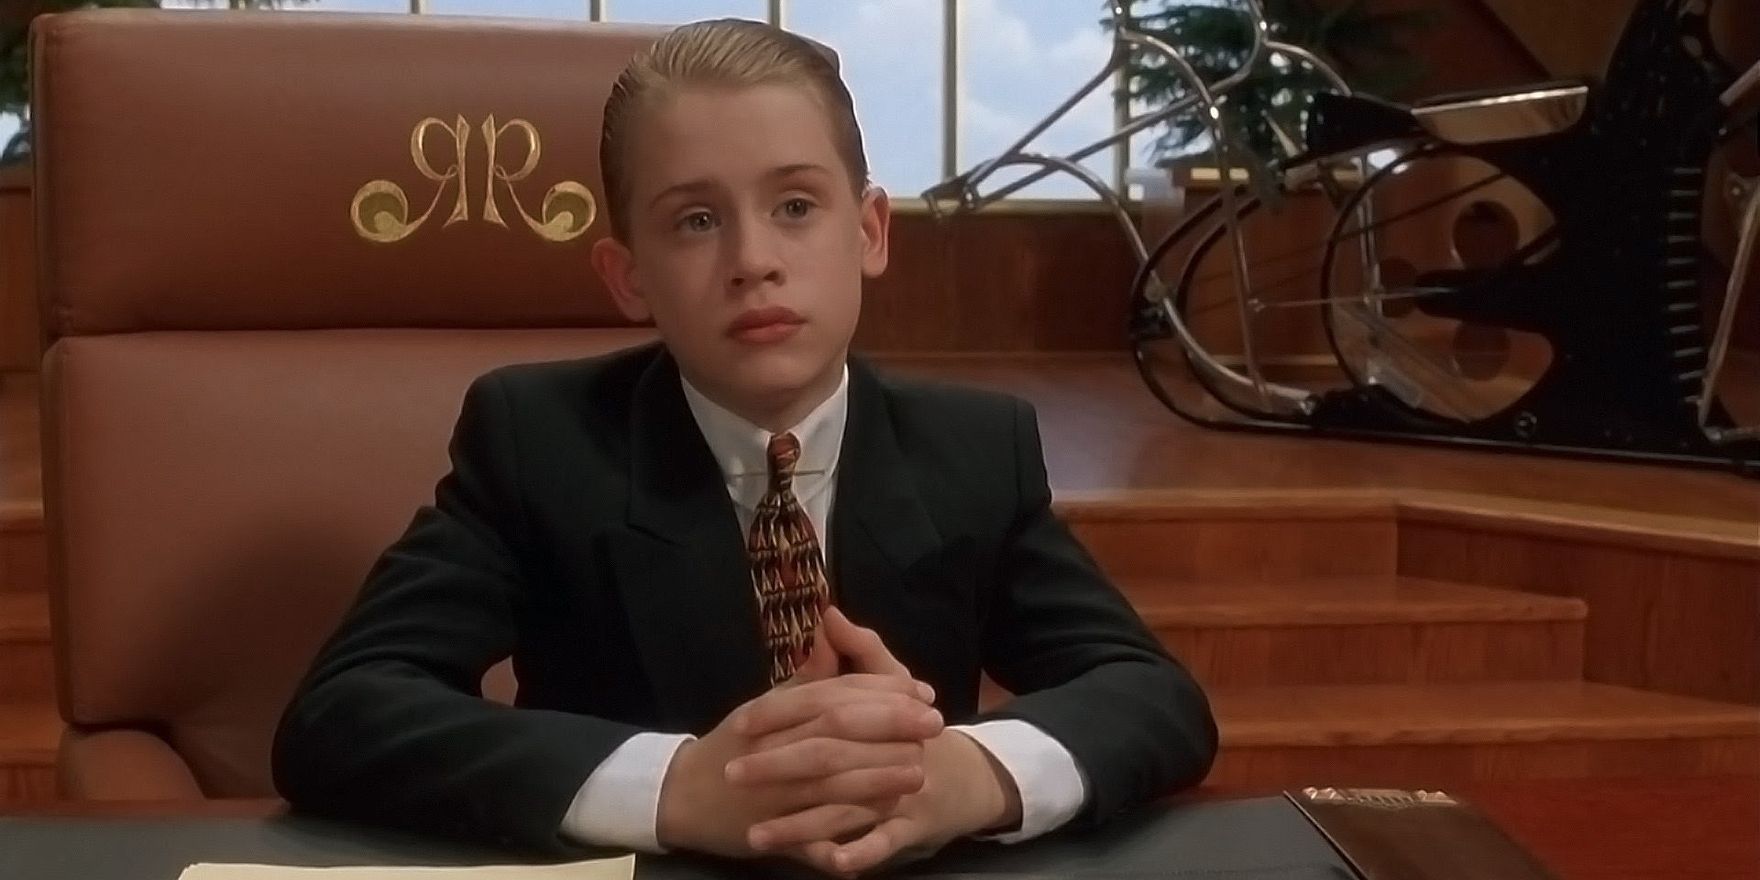 Richie Rich wearing a suit and sitting behind his desk